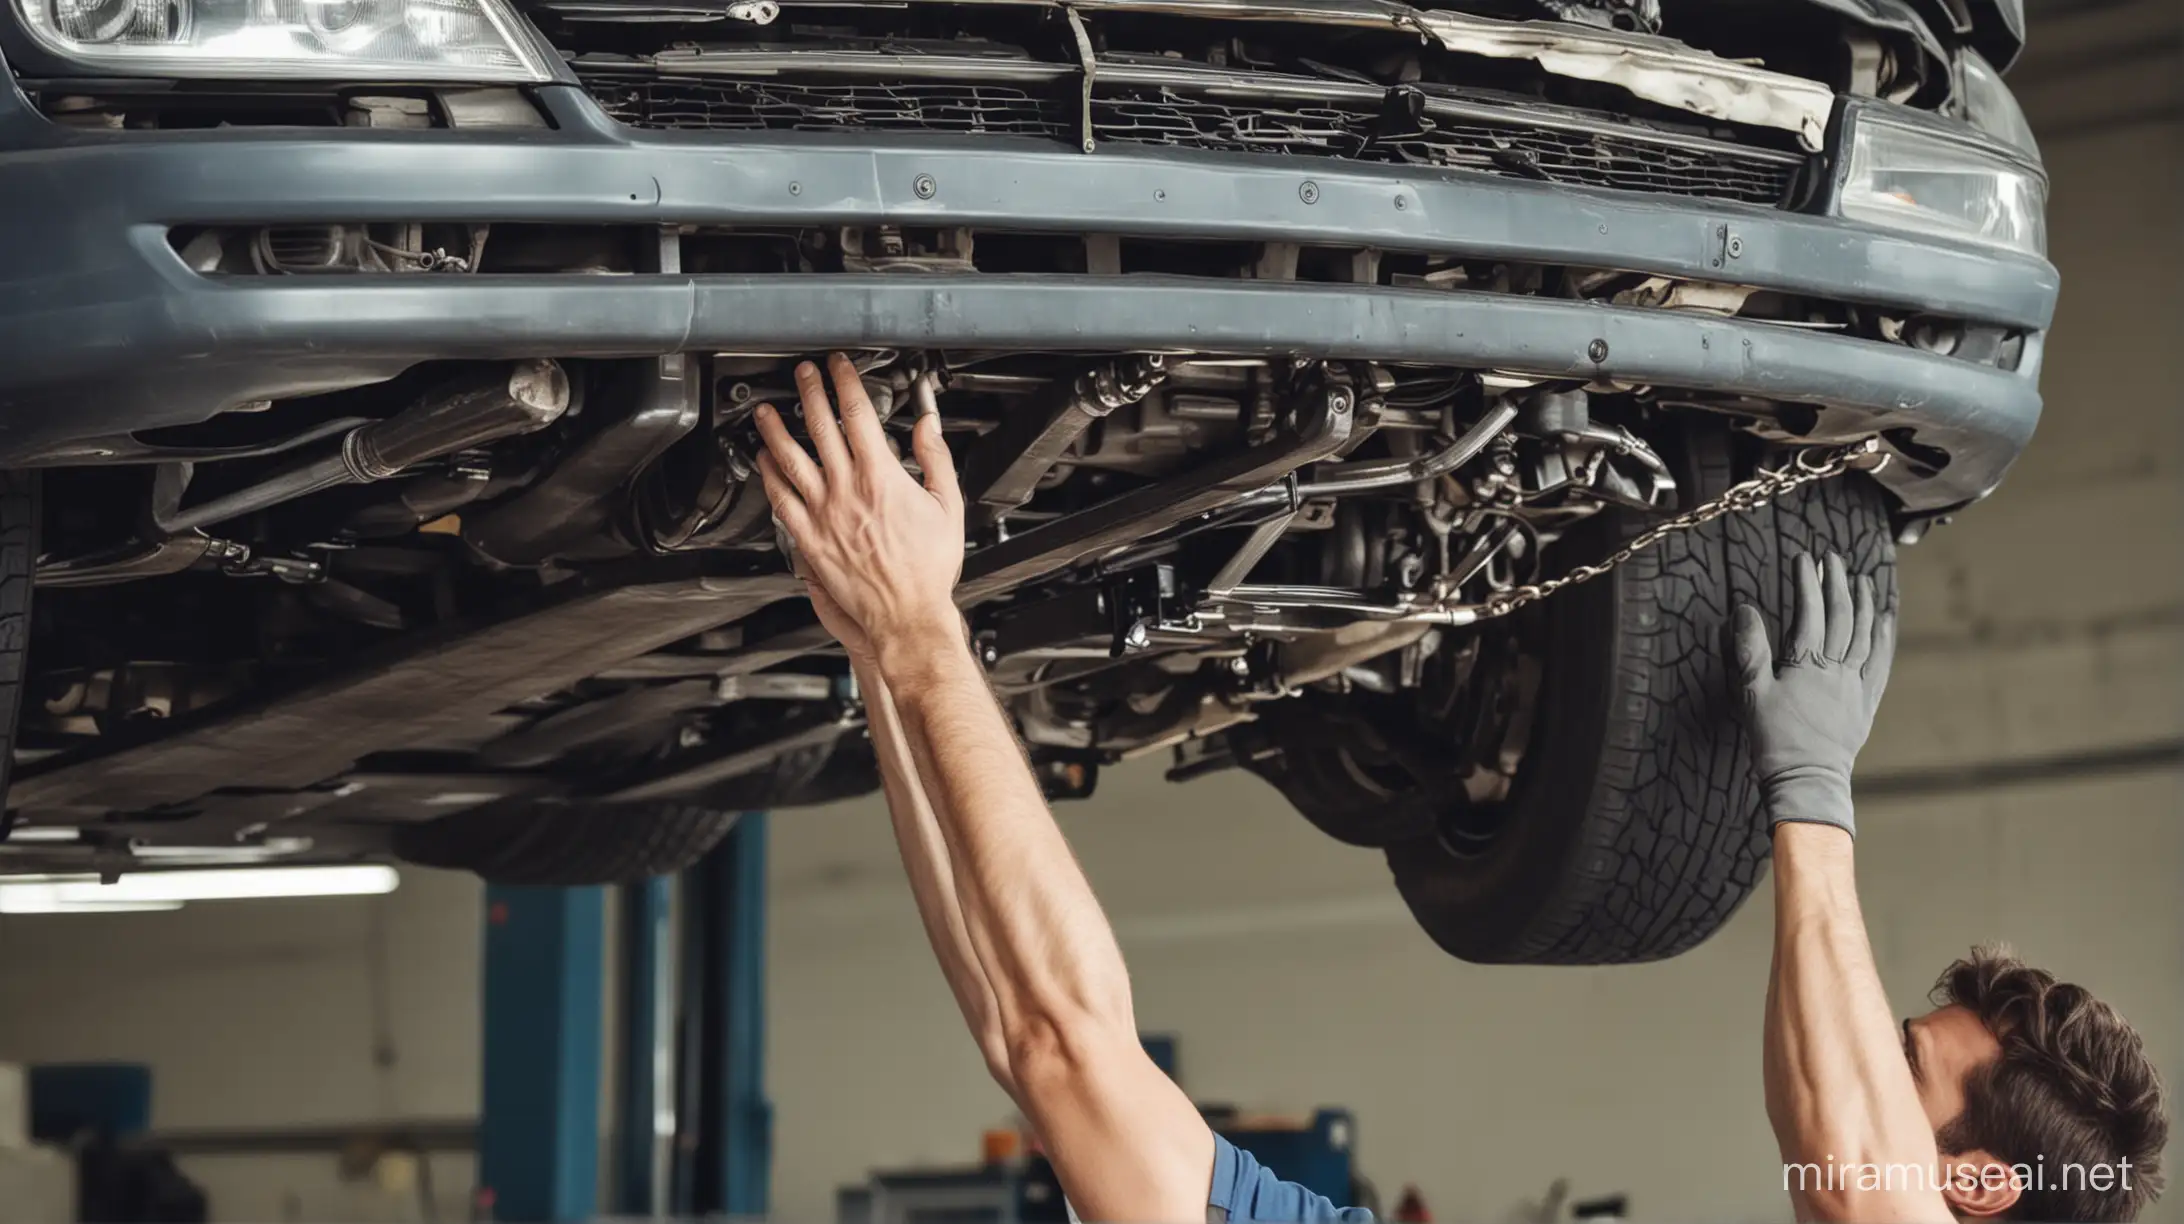 car workshop websites tumbnail image of a mechanic's hands and a car being repaired on a hoist